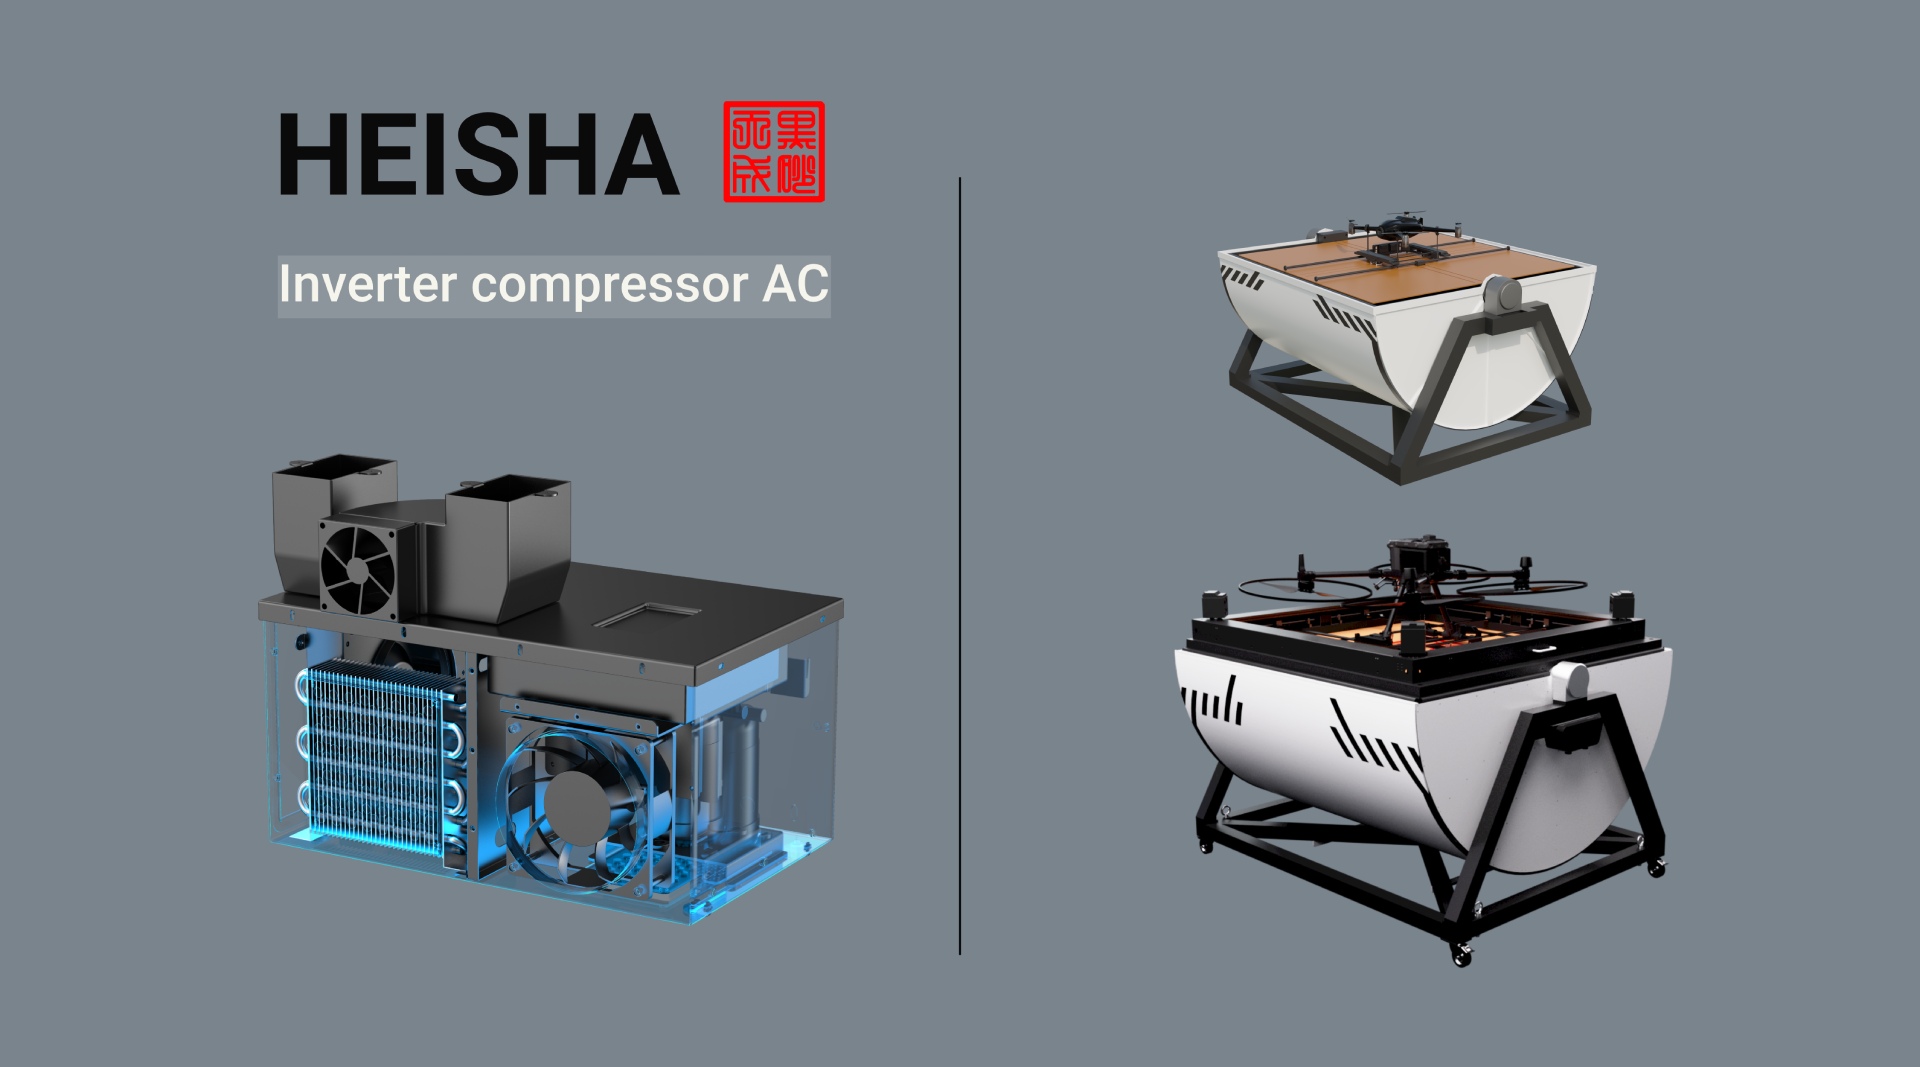 How the Air conditioner of the HEISHA drone dock is evolved